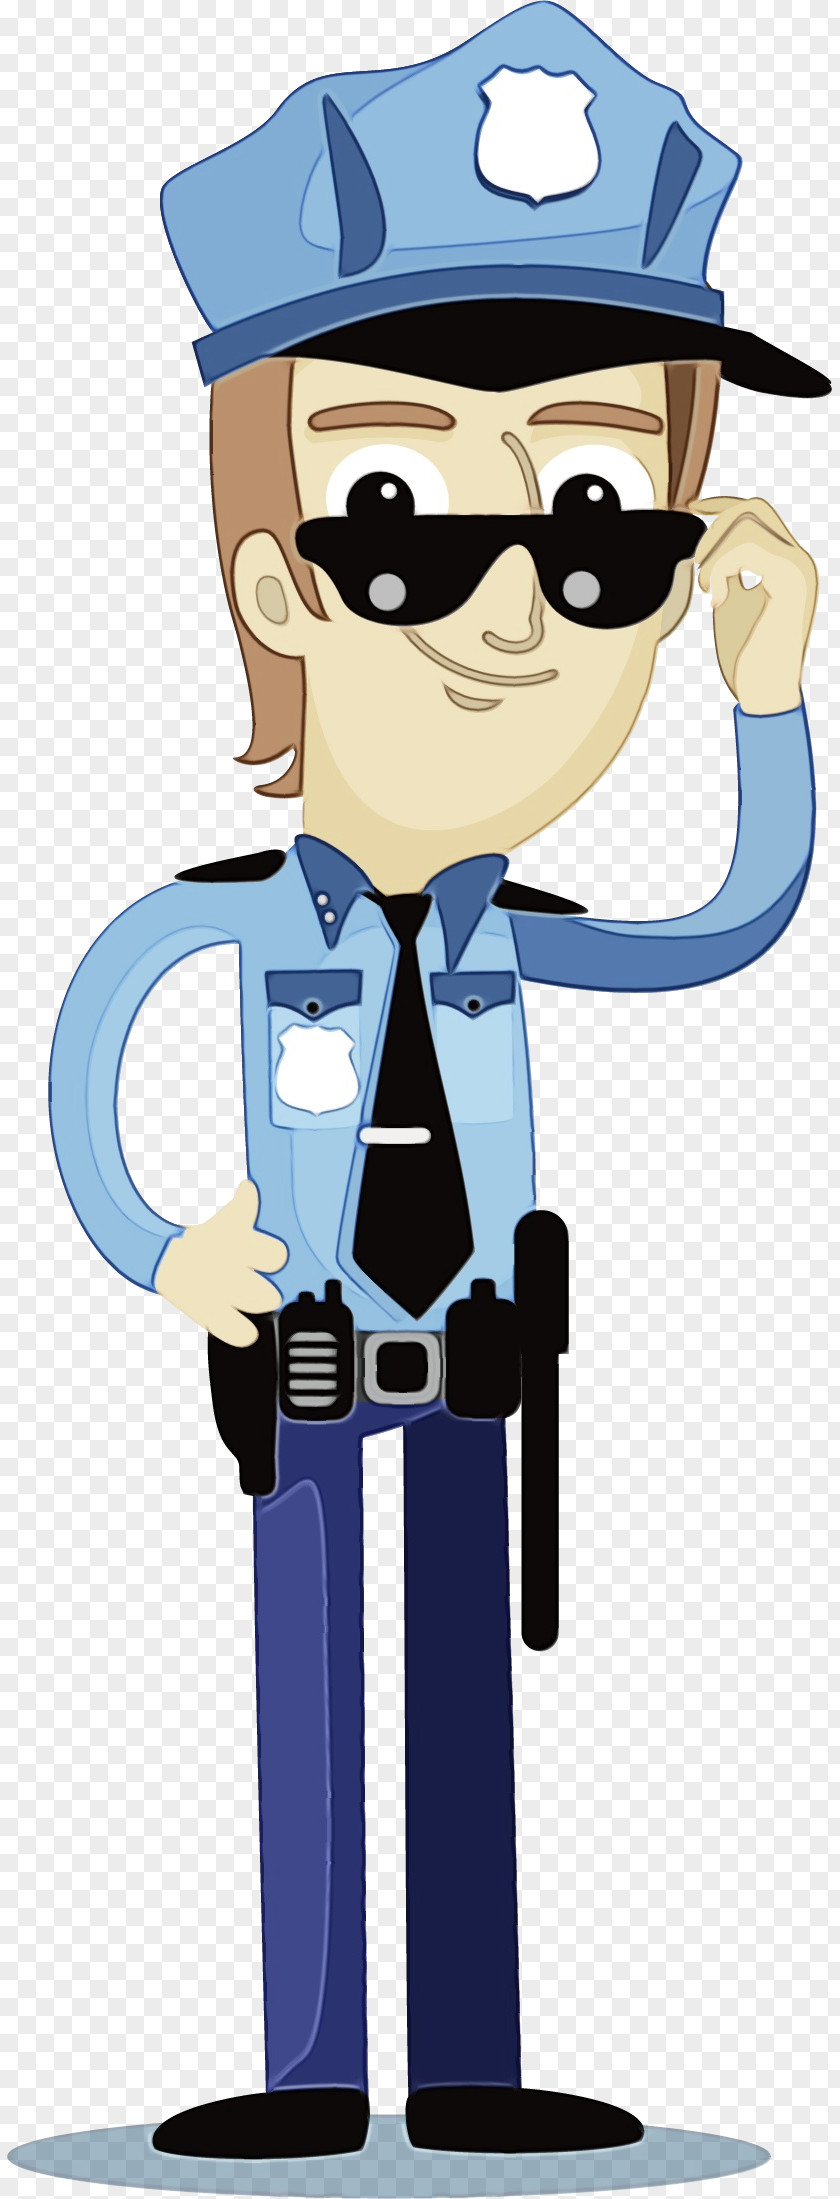 Cartoon Official Police Officer Gesture PNG